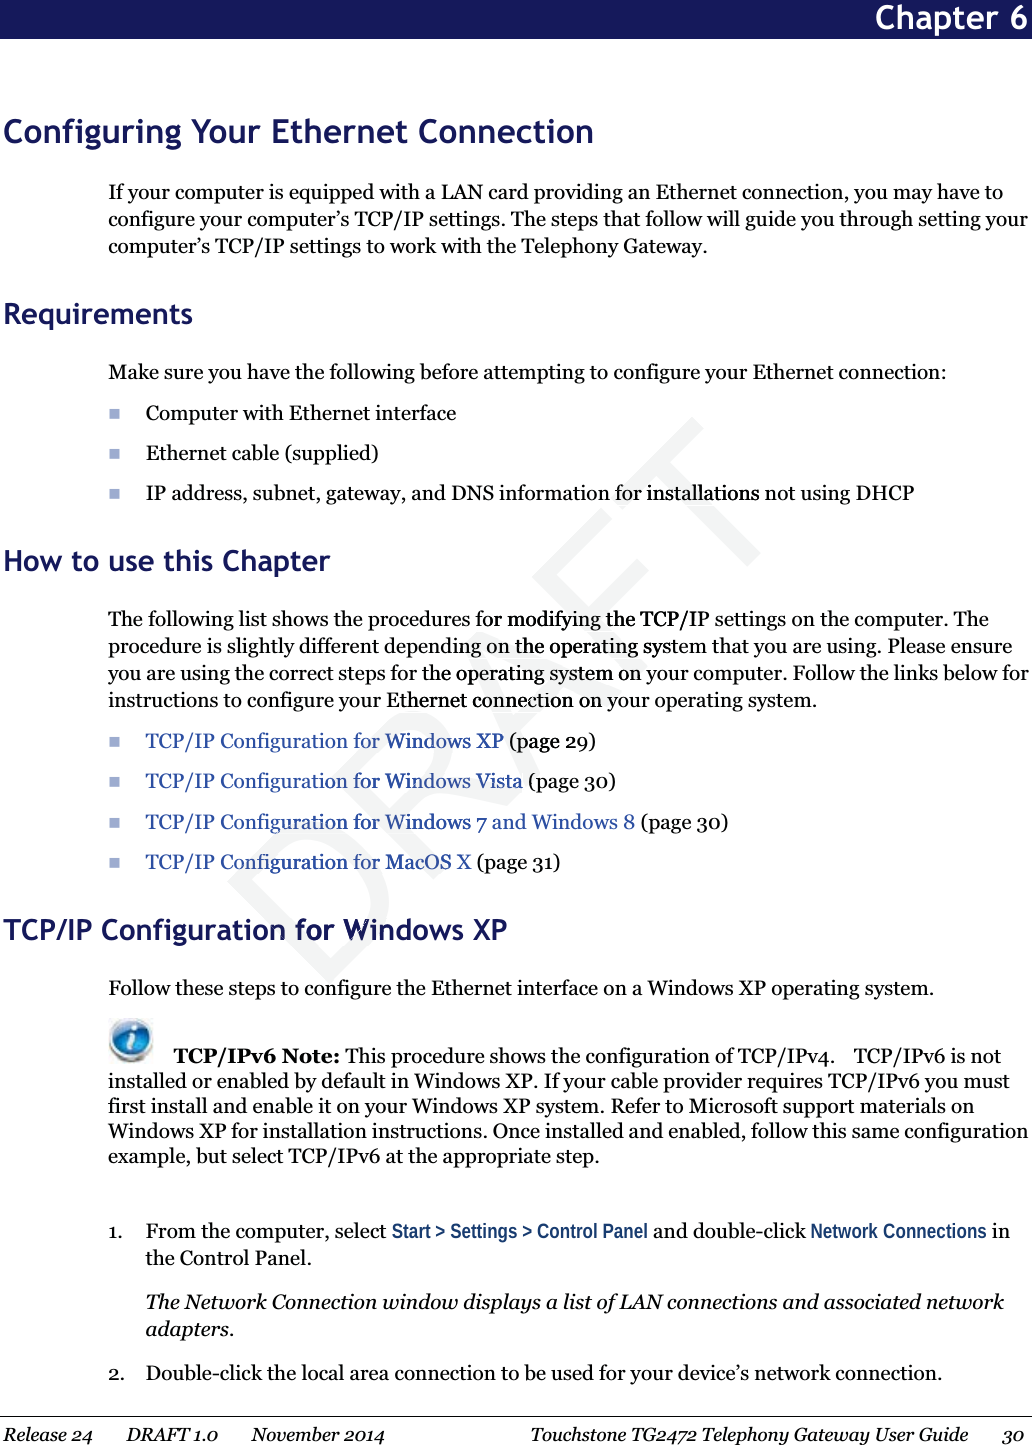  Chapter 6 Configuring Your Ethernet Connection If your computer is equipped with a LAN card providing an Ethernet connection, you may have to configure your computer’s TCP/IP settings. The steps that follow will guide you through setting your computer’s TCP/IP settings to work with the Telephony Gateway.   Requirements Make sure you have the following before attempting to configure your Ethernet connection:  Computer with Ethernet interface  Ethernet cable (supplied)  IP address, subnet, gateway, and DNS information for installations not using DHCP   How to use this Chapter The following list shows the procedures for modifying the TCP/IP settings on the computer. The procedure is slightly different depending on the operating system that you are using. Please ensure you are using the correct steps for the operating system on your computer. Follow the links below for instructions to configure your Ethernet connection on your operating system.  TCP/IP Configuration for Windows XP (page 29)  TCP/IP Configuration for Windows Vista (page 30)  TCP/IP Configuration for Windows 7 and Windows 8 (page 30)  TCP/IP Configuration for MacOS X (page 31) TCP/IP Configuration for Windows XP Follow these steps to configure the Ethernet interface on a Windows XP operating system.  TCP/IPv6 Note: This procedure shows the configuration of TCP/IPv4.    TCP/IPv6 is not installed or enabled by default in Windows XP. If your cable provider requires TCP/IPv6 you must first install and enable it on your Windows XP system. Refer to Microsoft support materials on Windows XP for installation instructions. Once installed and enabled, follow this same configuration example, but select TCP/IPv6 at the appropriate step.  1. From the computer, select Start &gt; Settings &gt; Control Panel and double-click Network Connections in the Control Panel. The Network Connection window displays a list of LAN connections and associated network adapters. 2. Double-click the local area connection to be used for your device’s network connection. Release 24    DRAFT 1.0    November 2014  Touchstone TG2472 Telephony Gateway User Guide    30  DRAFTn for installations nofor installafor modifying the TCP/IPfor modifying tding on the operating systng on the operating the operating system on yperating system on yEthernet connection on yothernet connection on yofor Windows XPfor Windows XP(page (pa2tion for Windows Vistaon for Windows Vista(p(pguration for Windows 7 aguration for Winonfiguration for MacOS Xonfiguration for MacOSon for Winon for Win